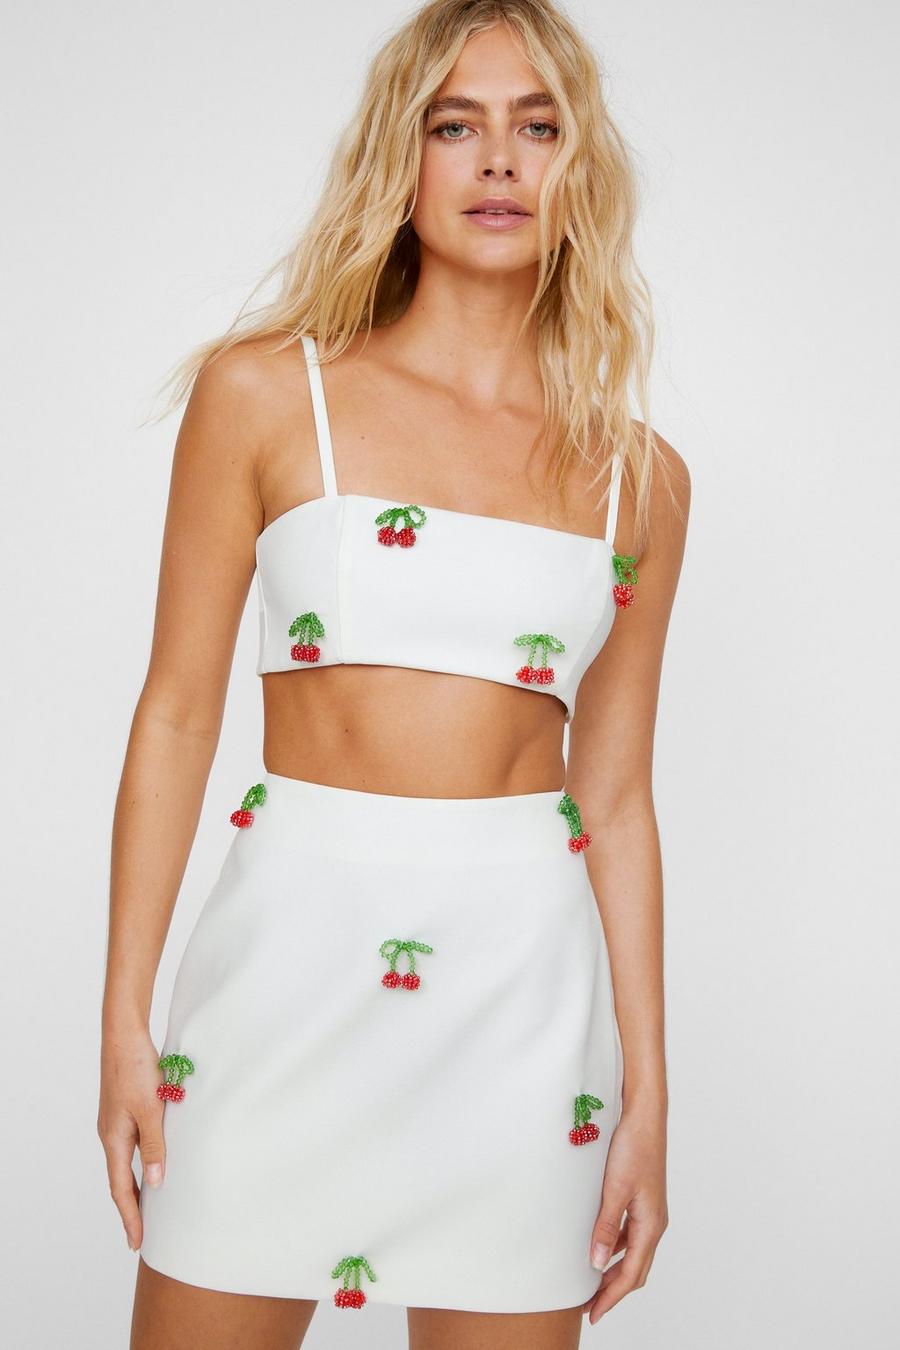 Cherry Embellished Tailored Bralet